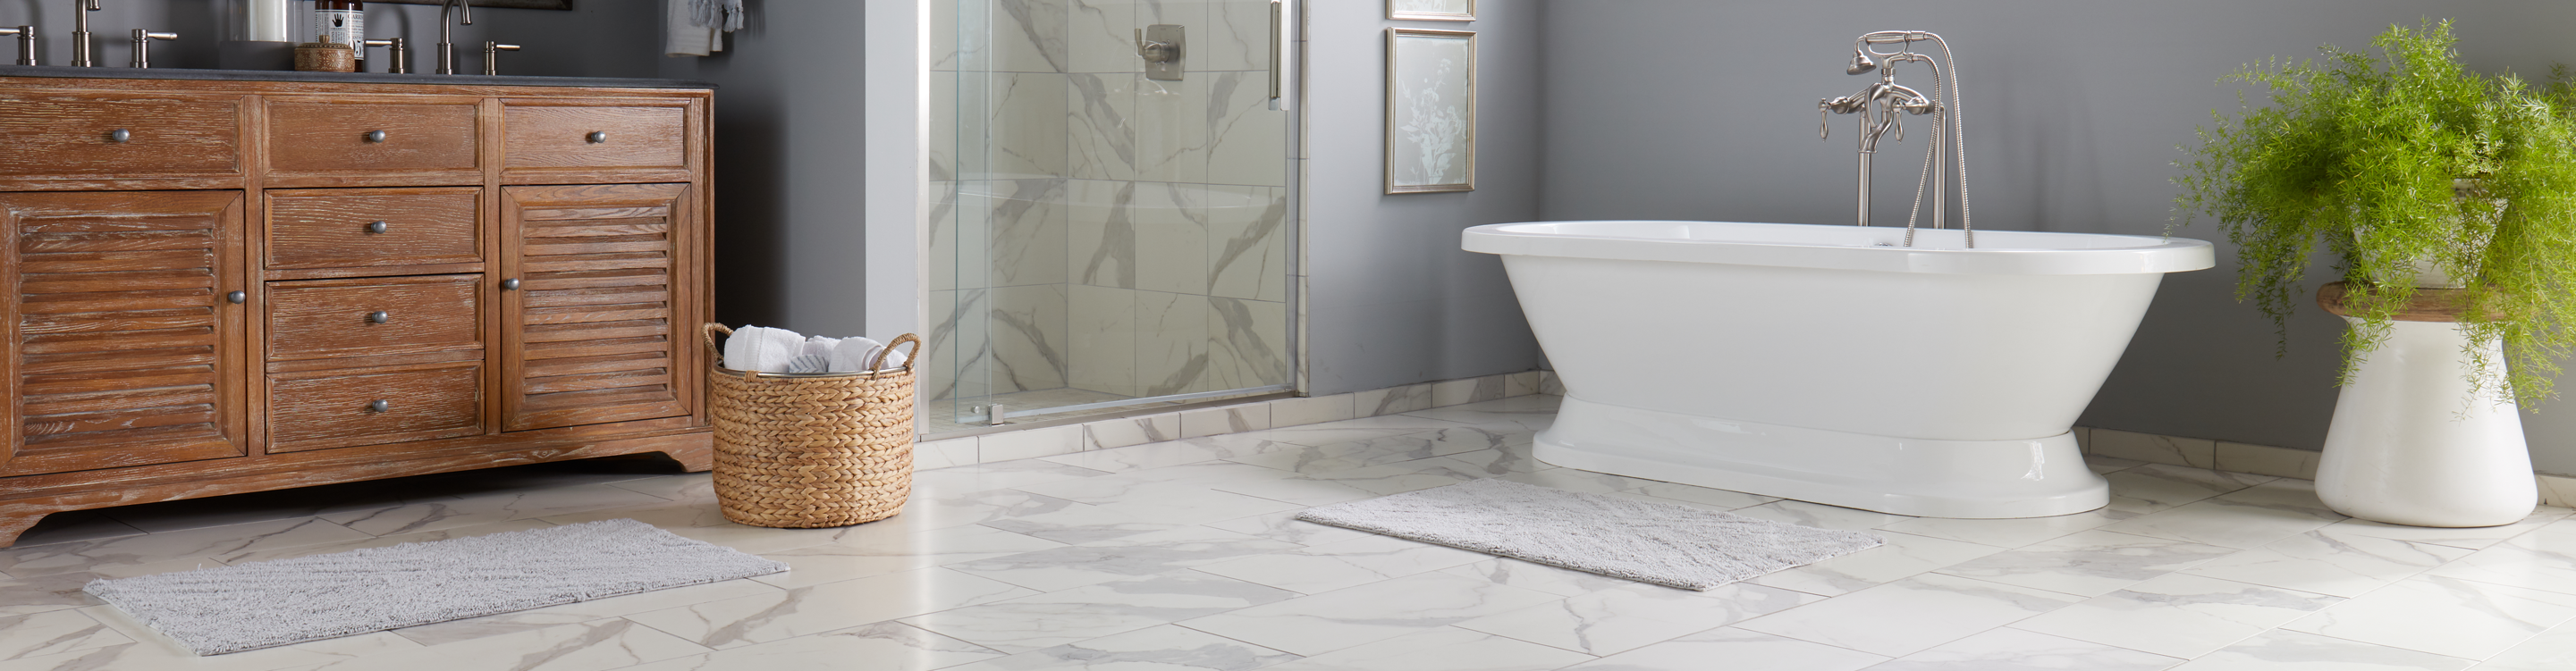 white marble tile in bath with standalone tub 